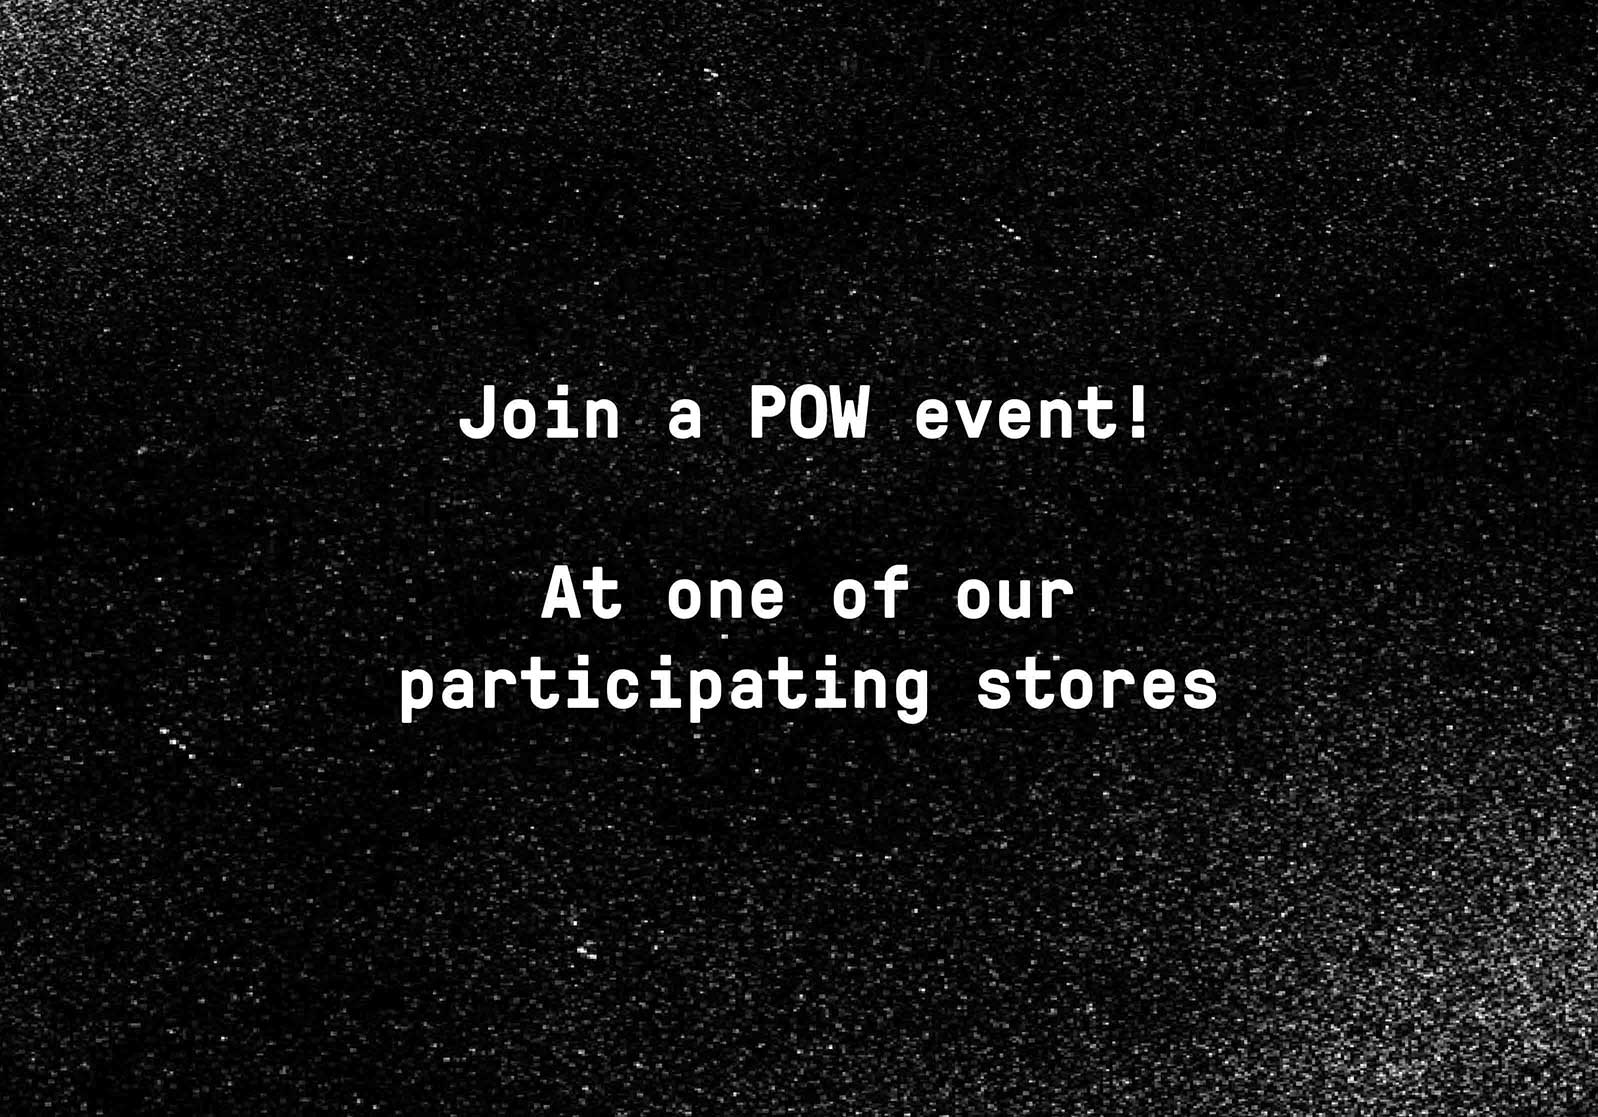 Join a POW event! - At one of our participating stores